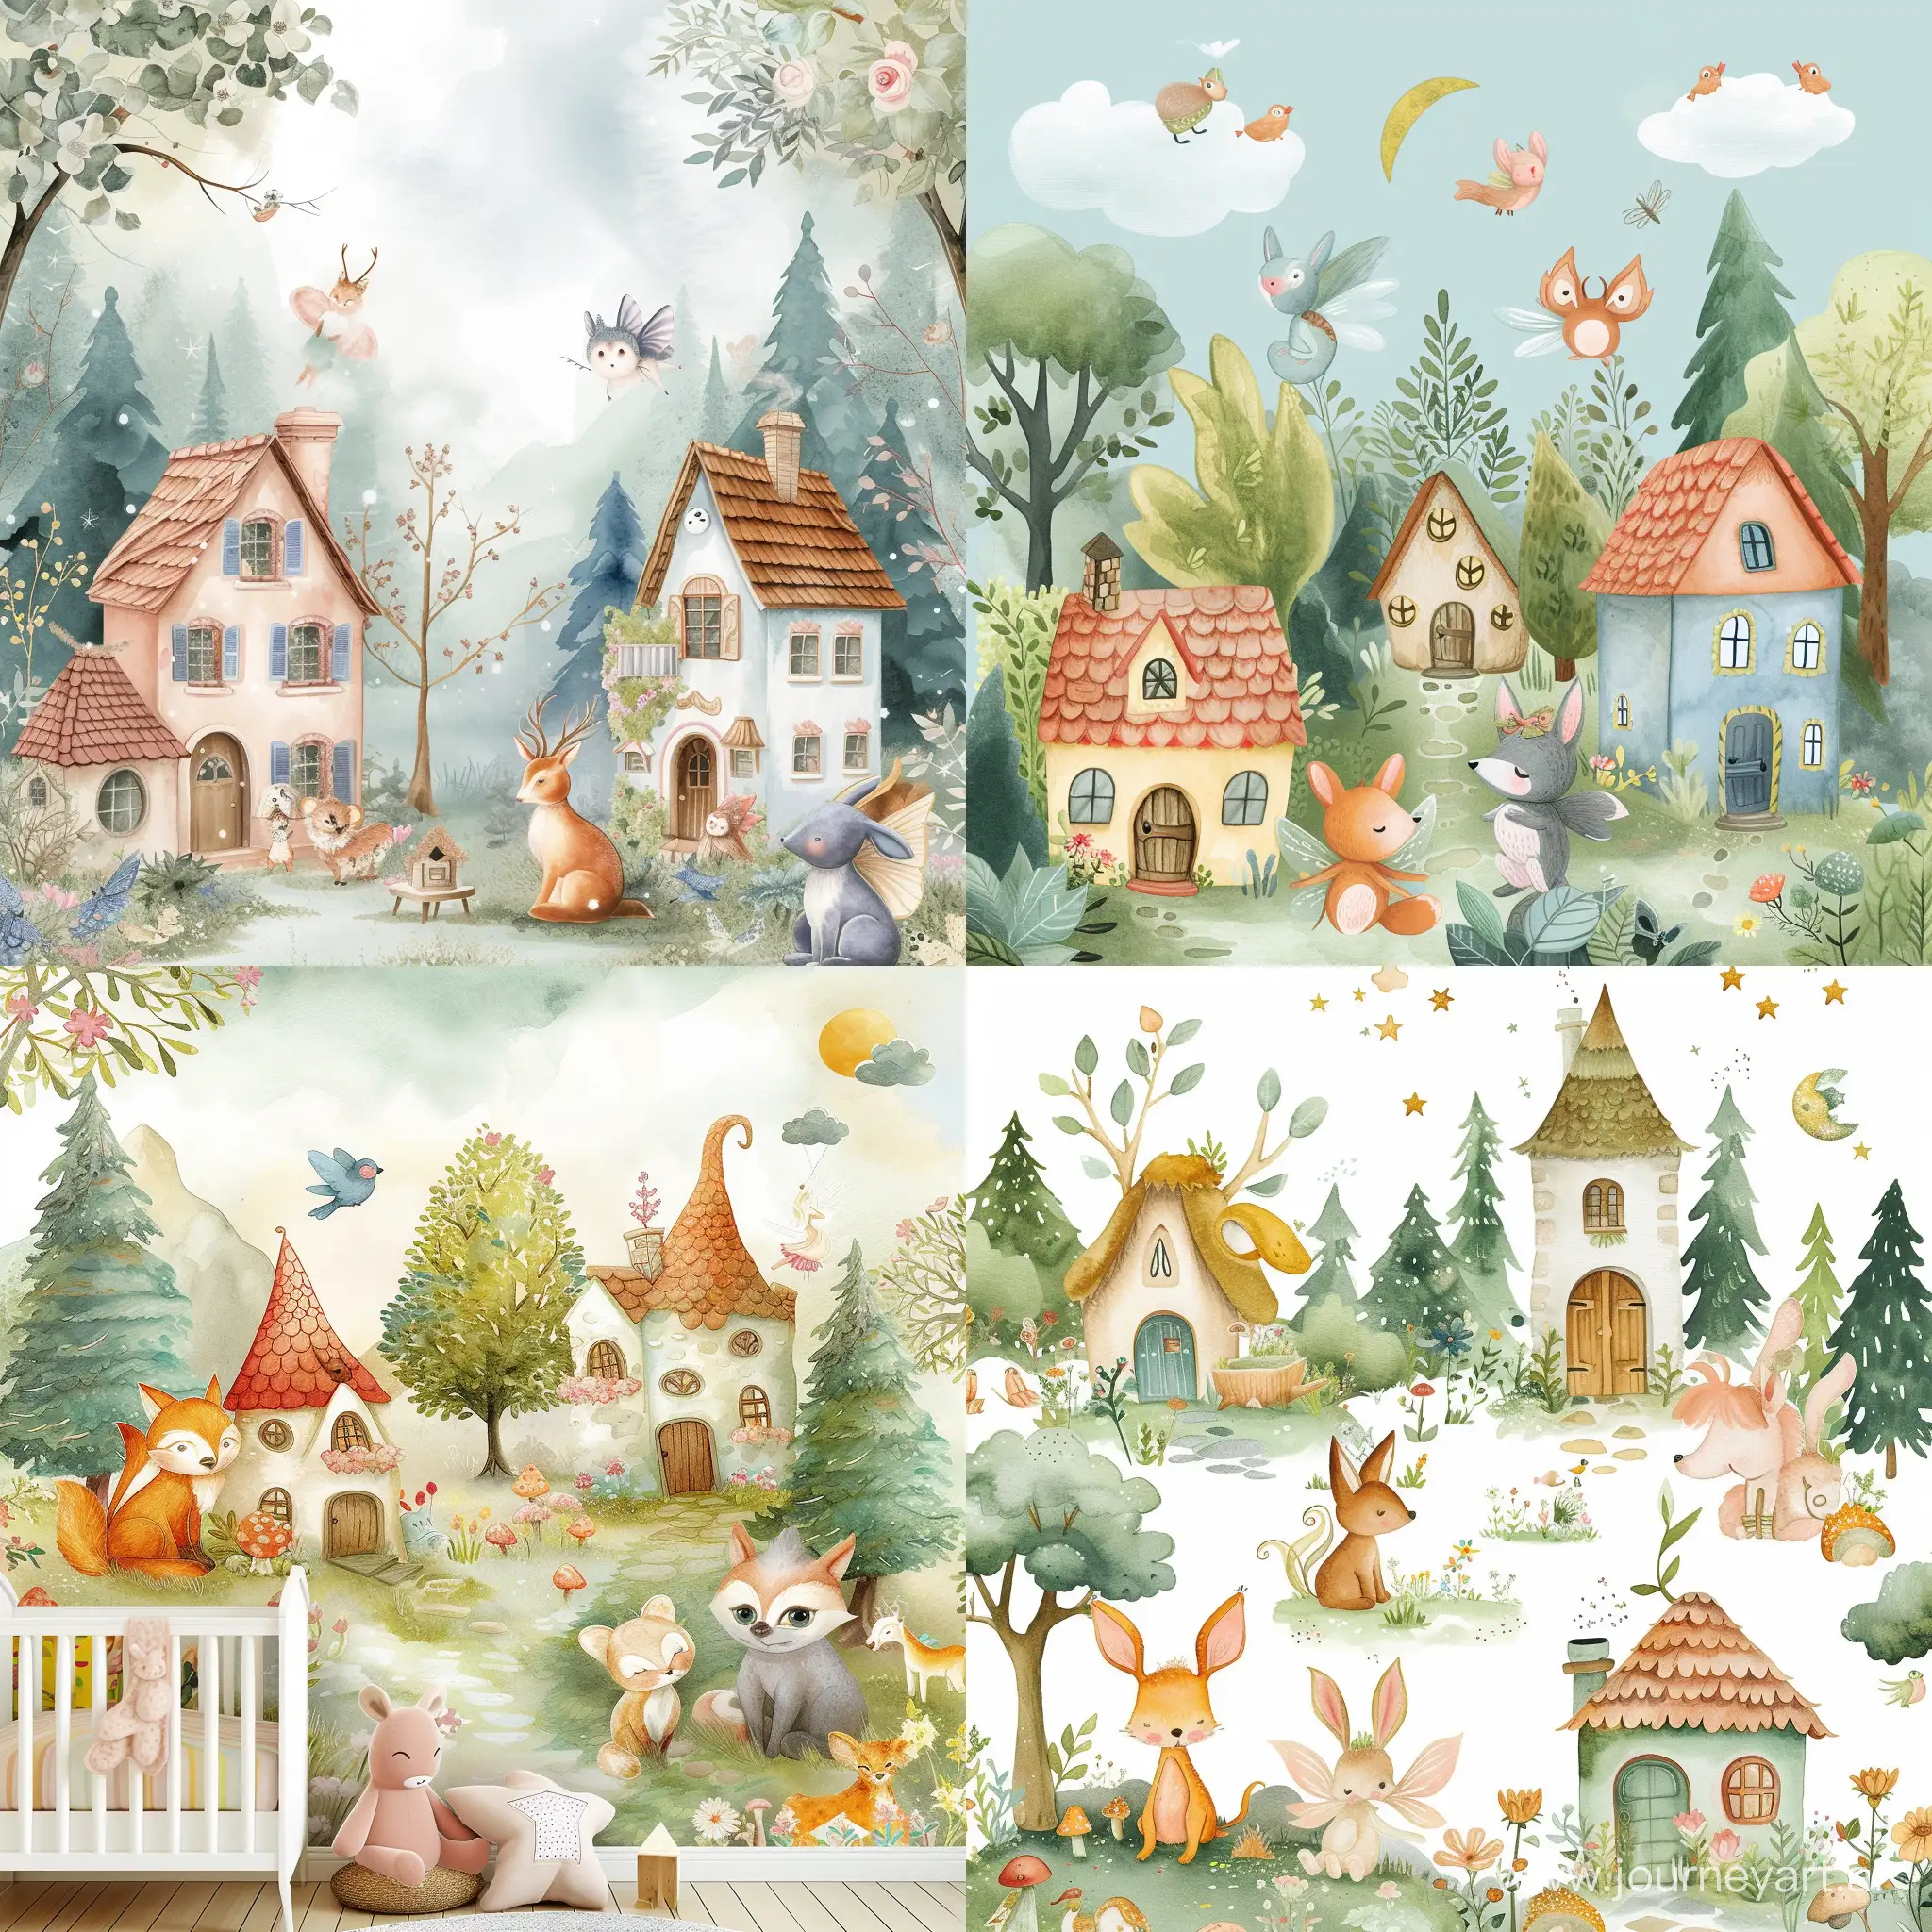 Whimsical-Forest-Animals-and-Fairy-Houses-Childrens-Illustrated-Wallpaper-Design